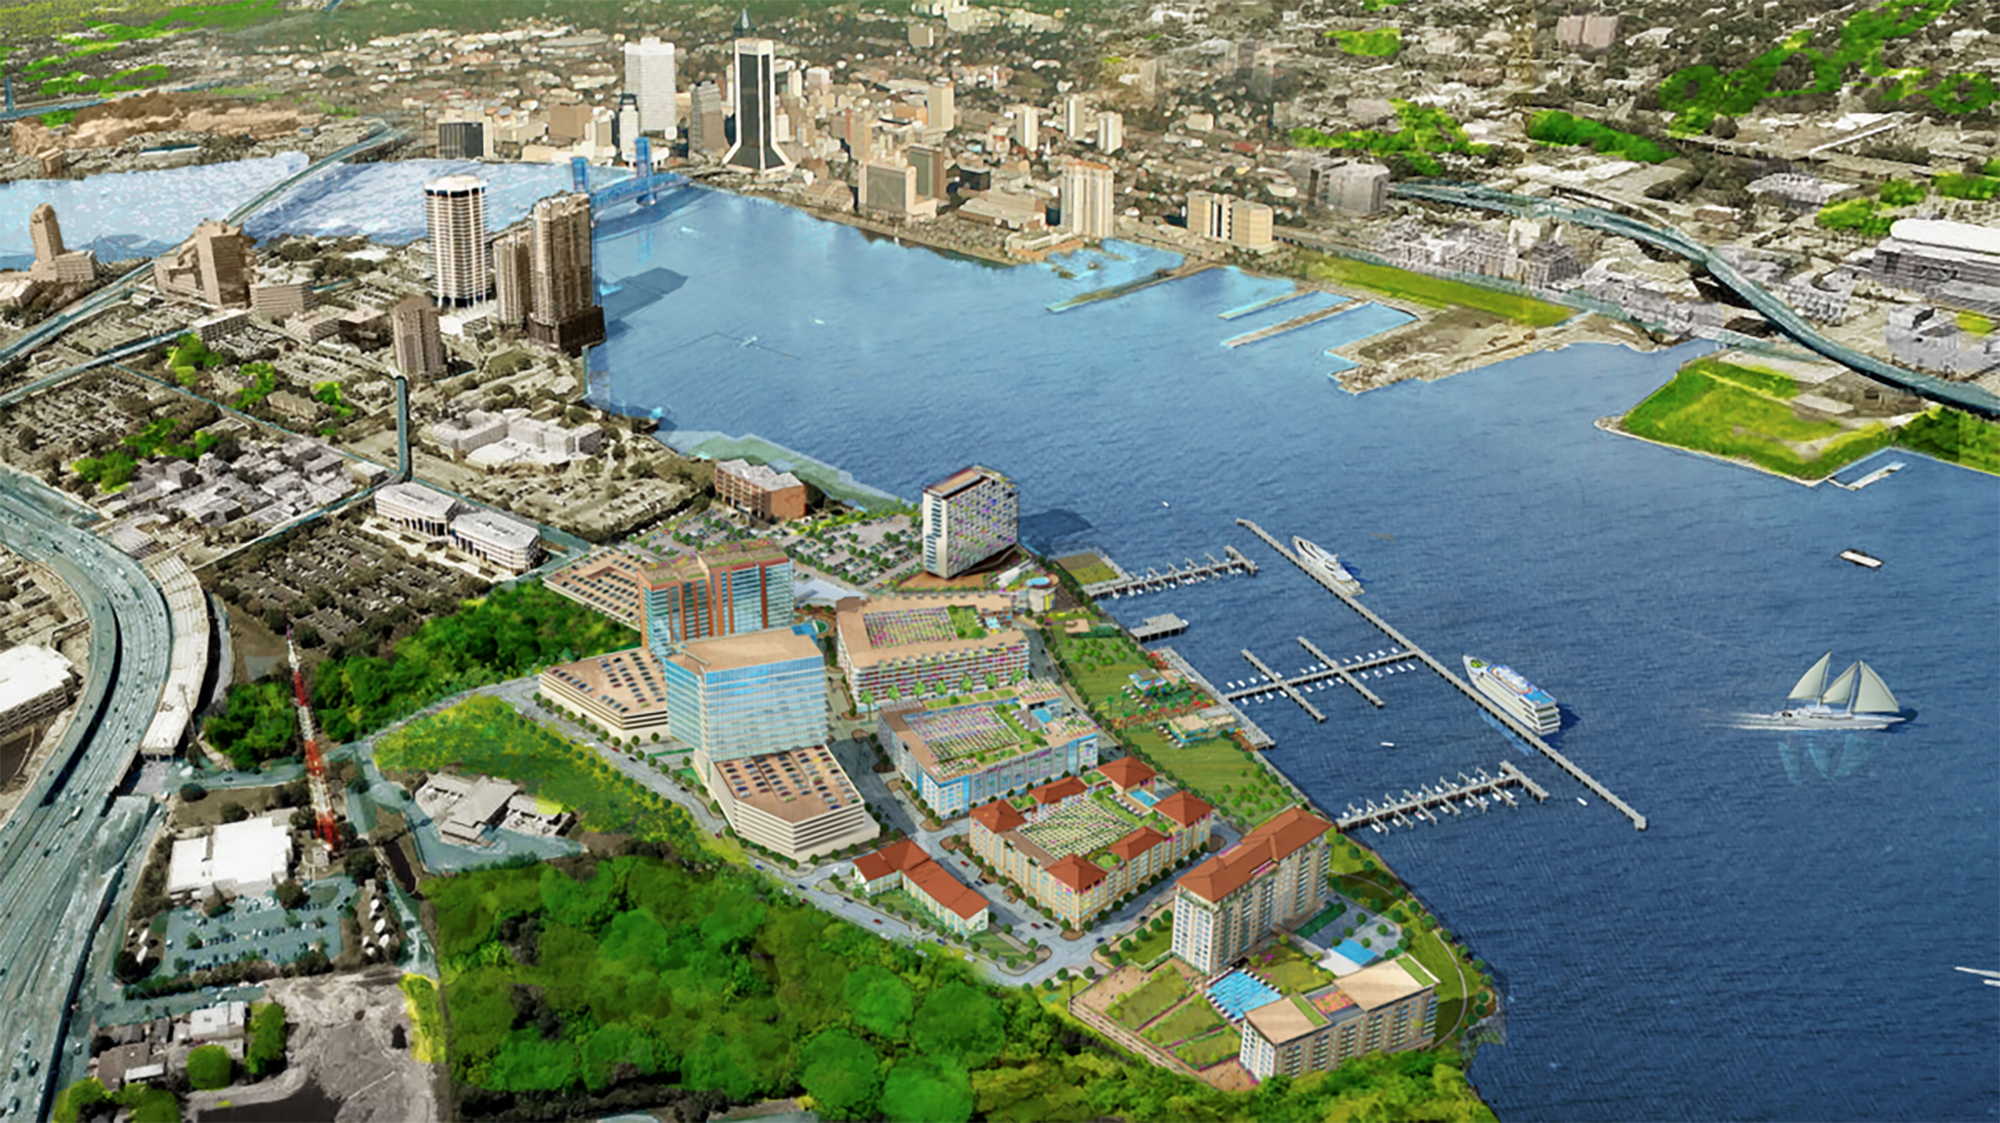 The District includes plans for a hotel, office space, marina and residential properties.